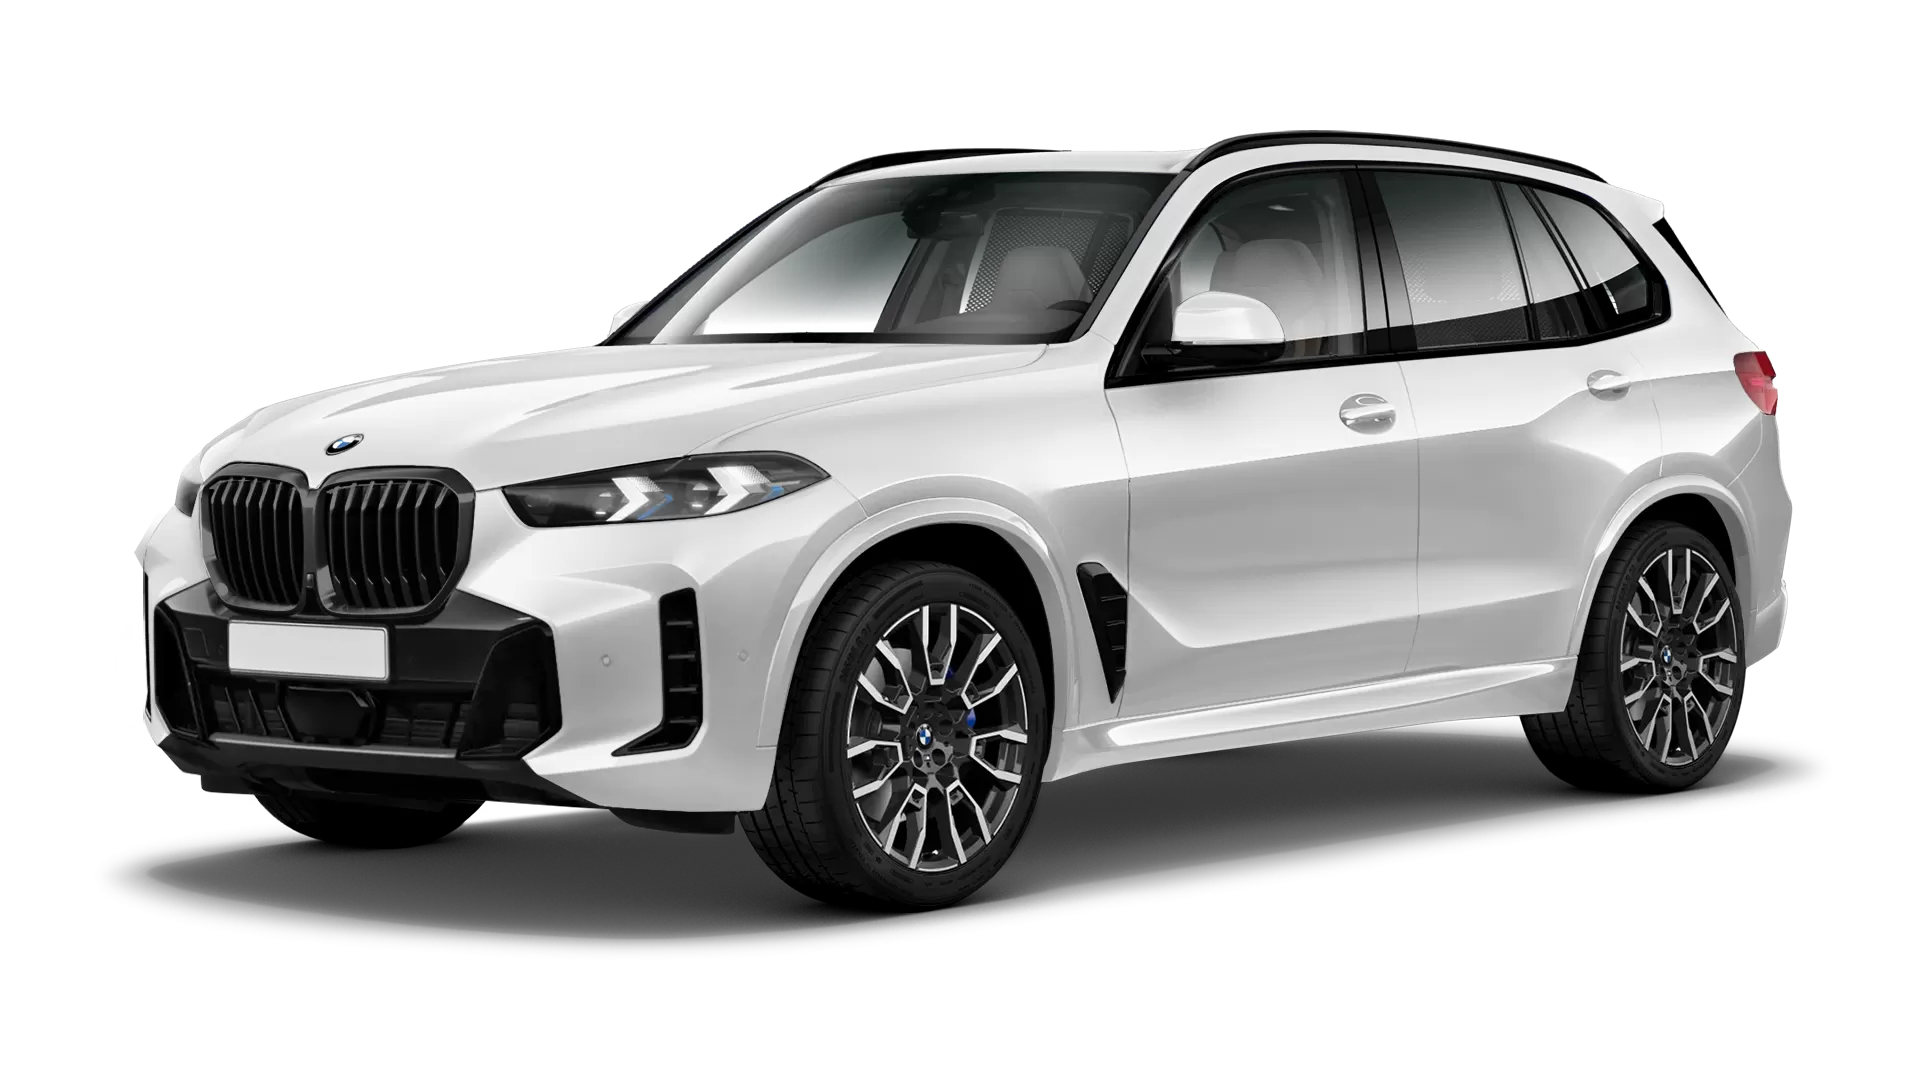 BMW X5 G05 LCI Facelift stock front view in Mineral White color